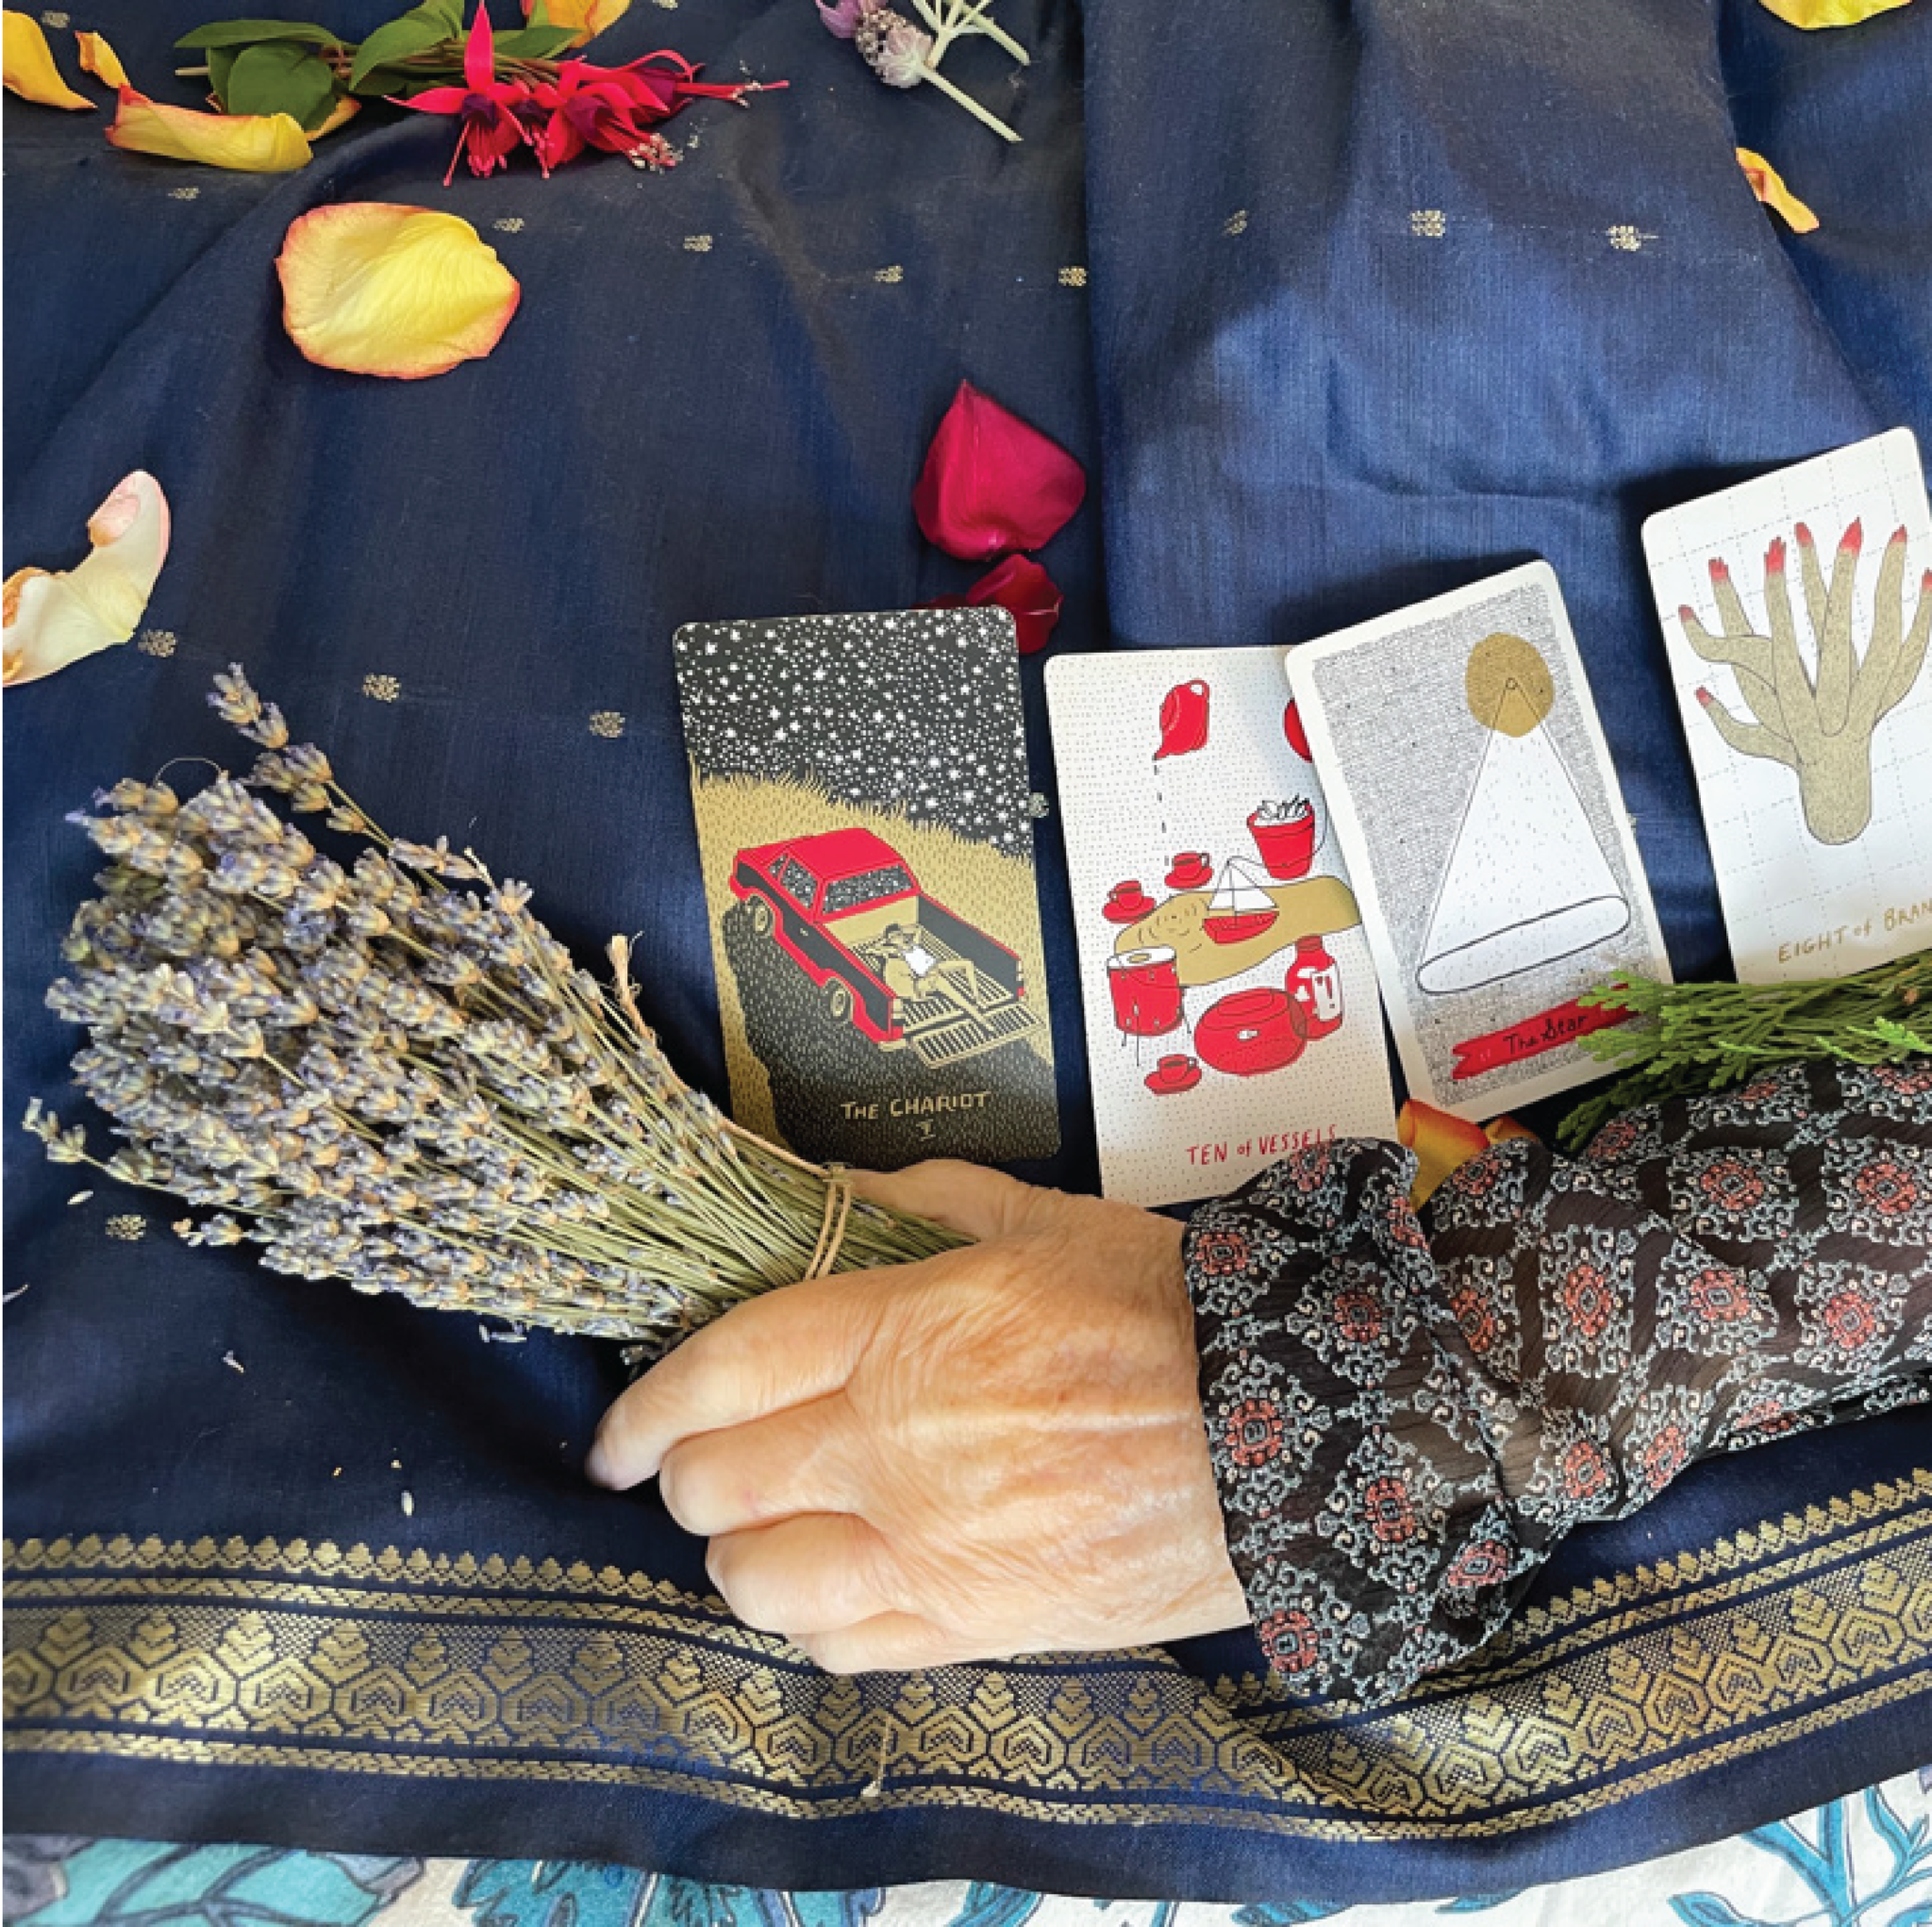 a hand holding a bundle of lavender with tarot cards resting on their body